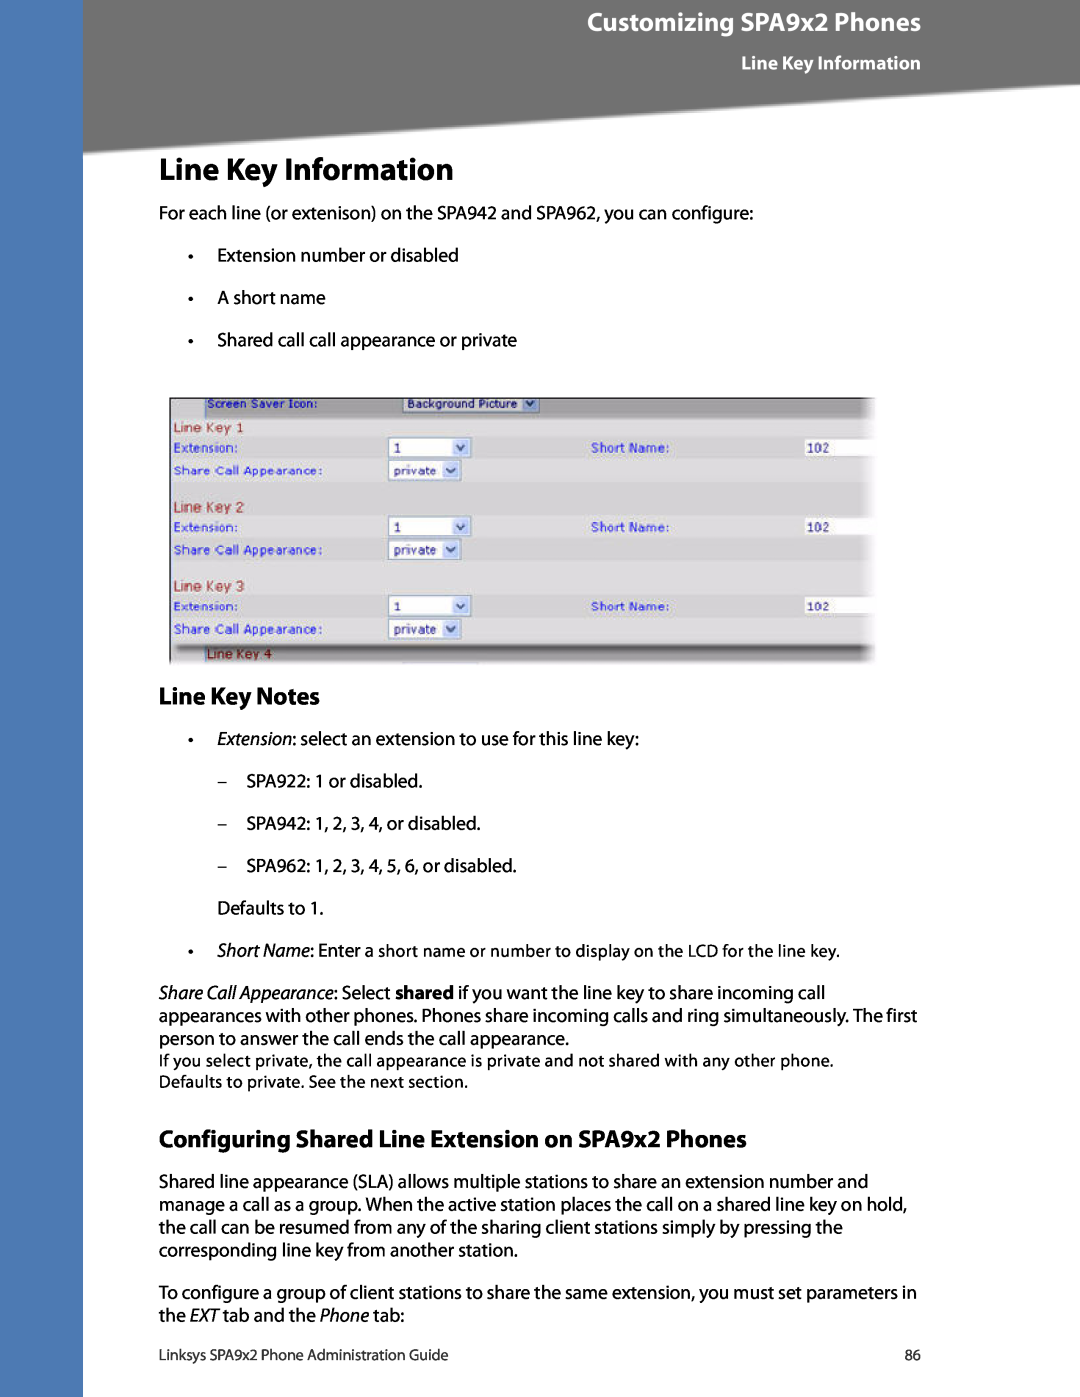 Linksys SPA942, SPA962, SPA932 Line Key Information, Line Key Notes, Configuring Shared Line Extension on SPA9x2 Phones 